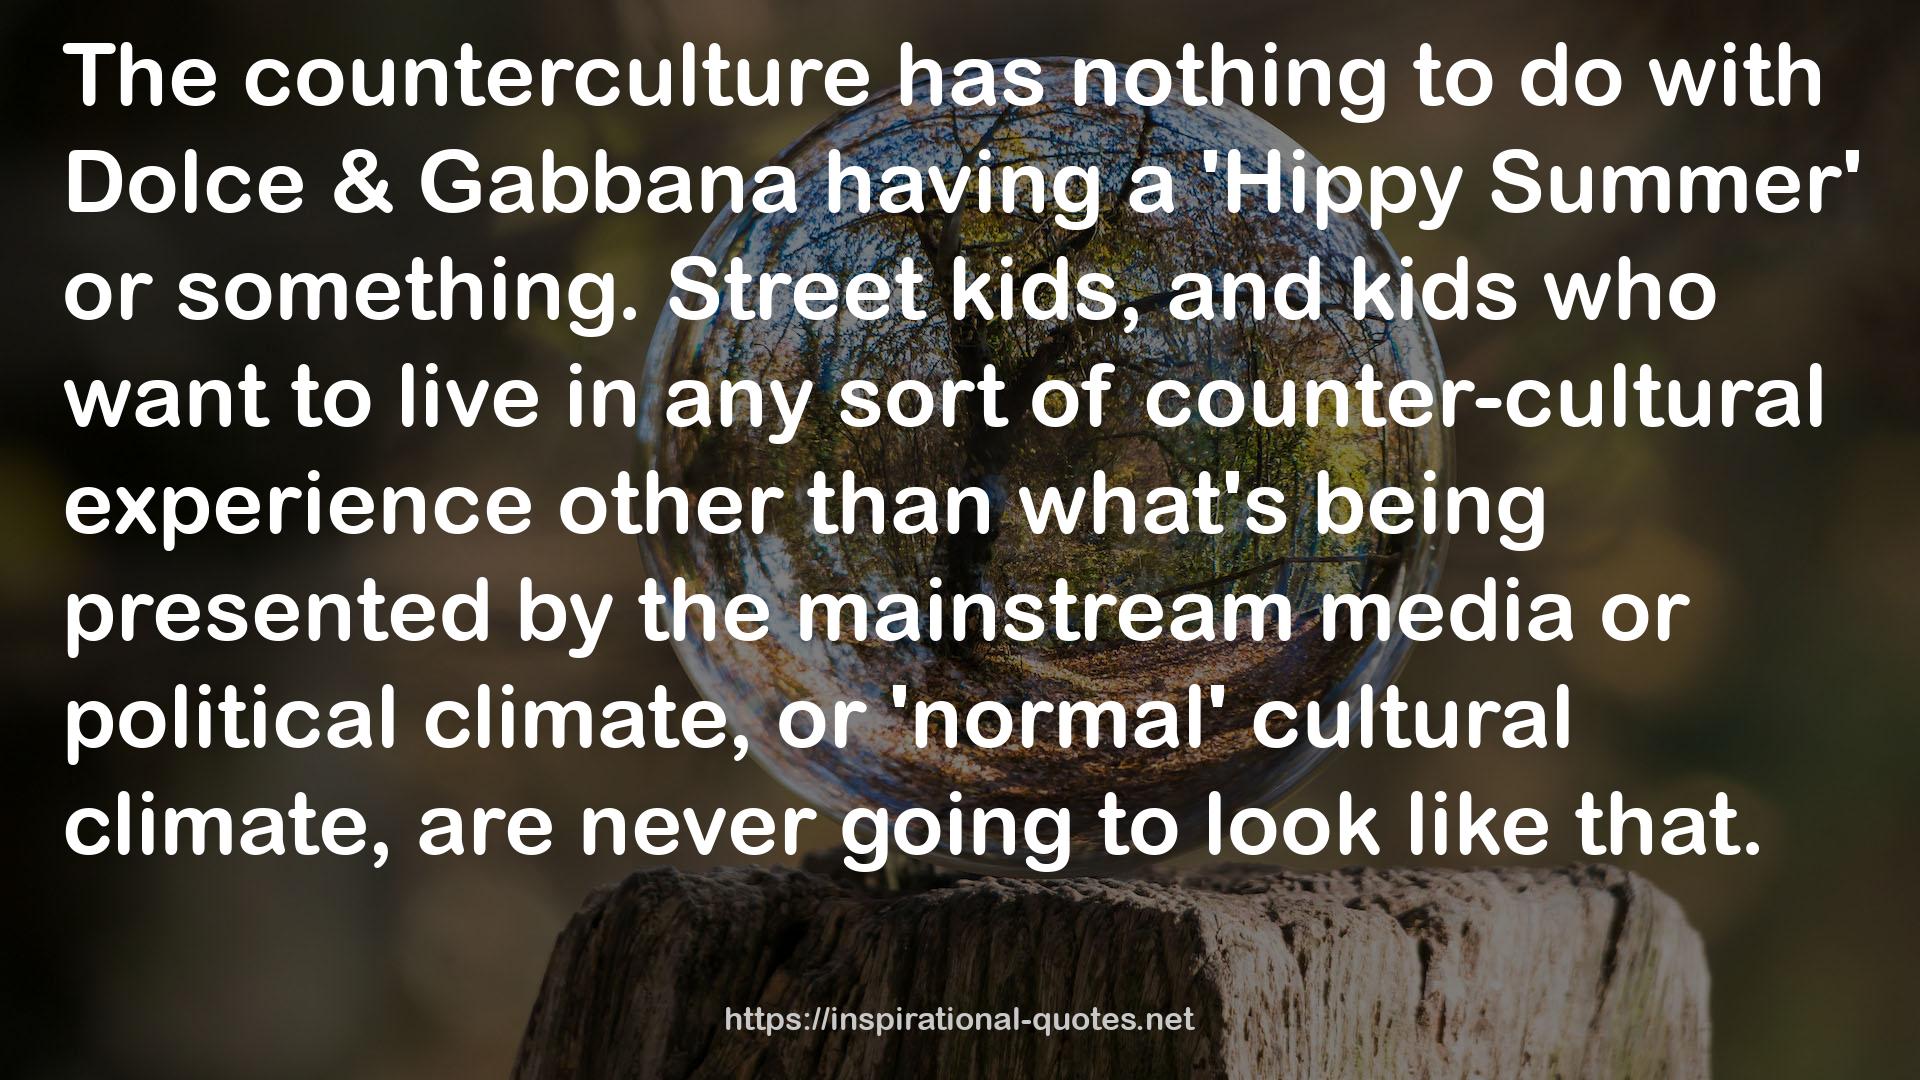 counter-cultural experience  QUOTES